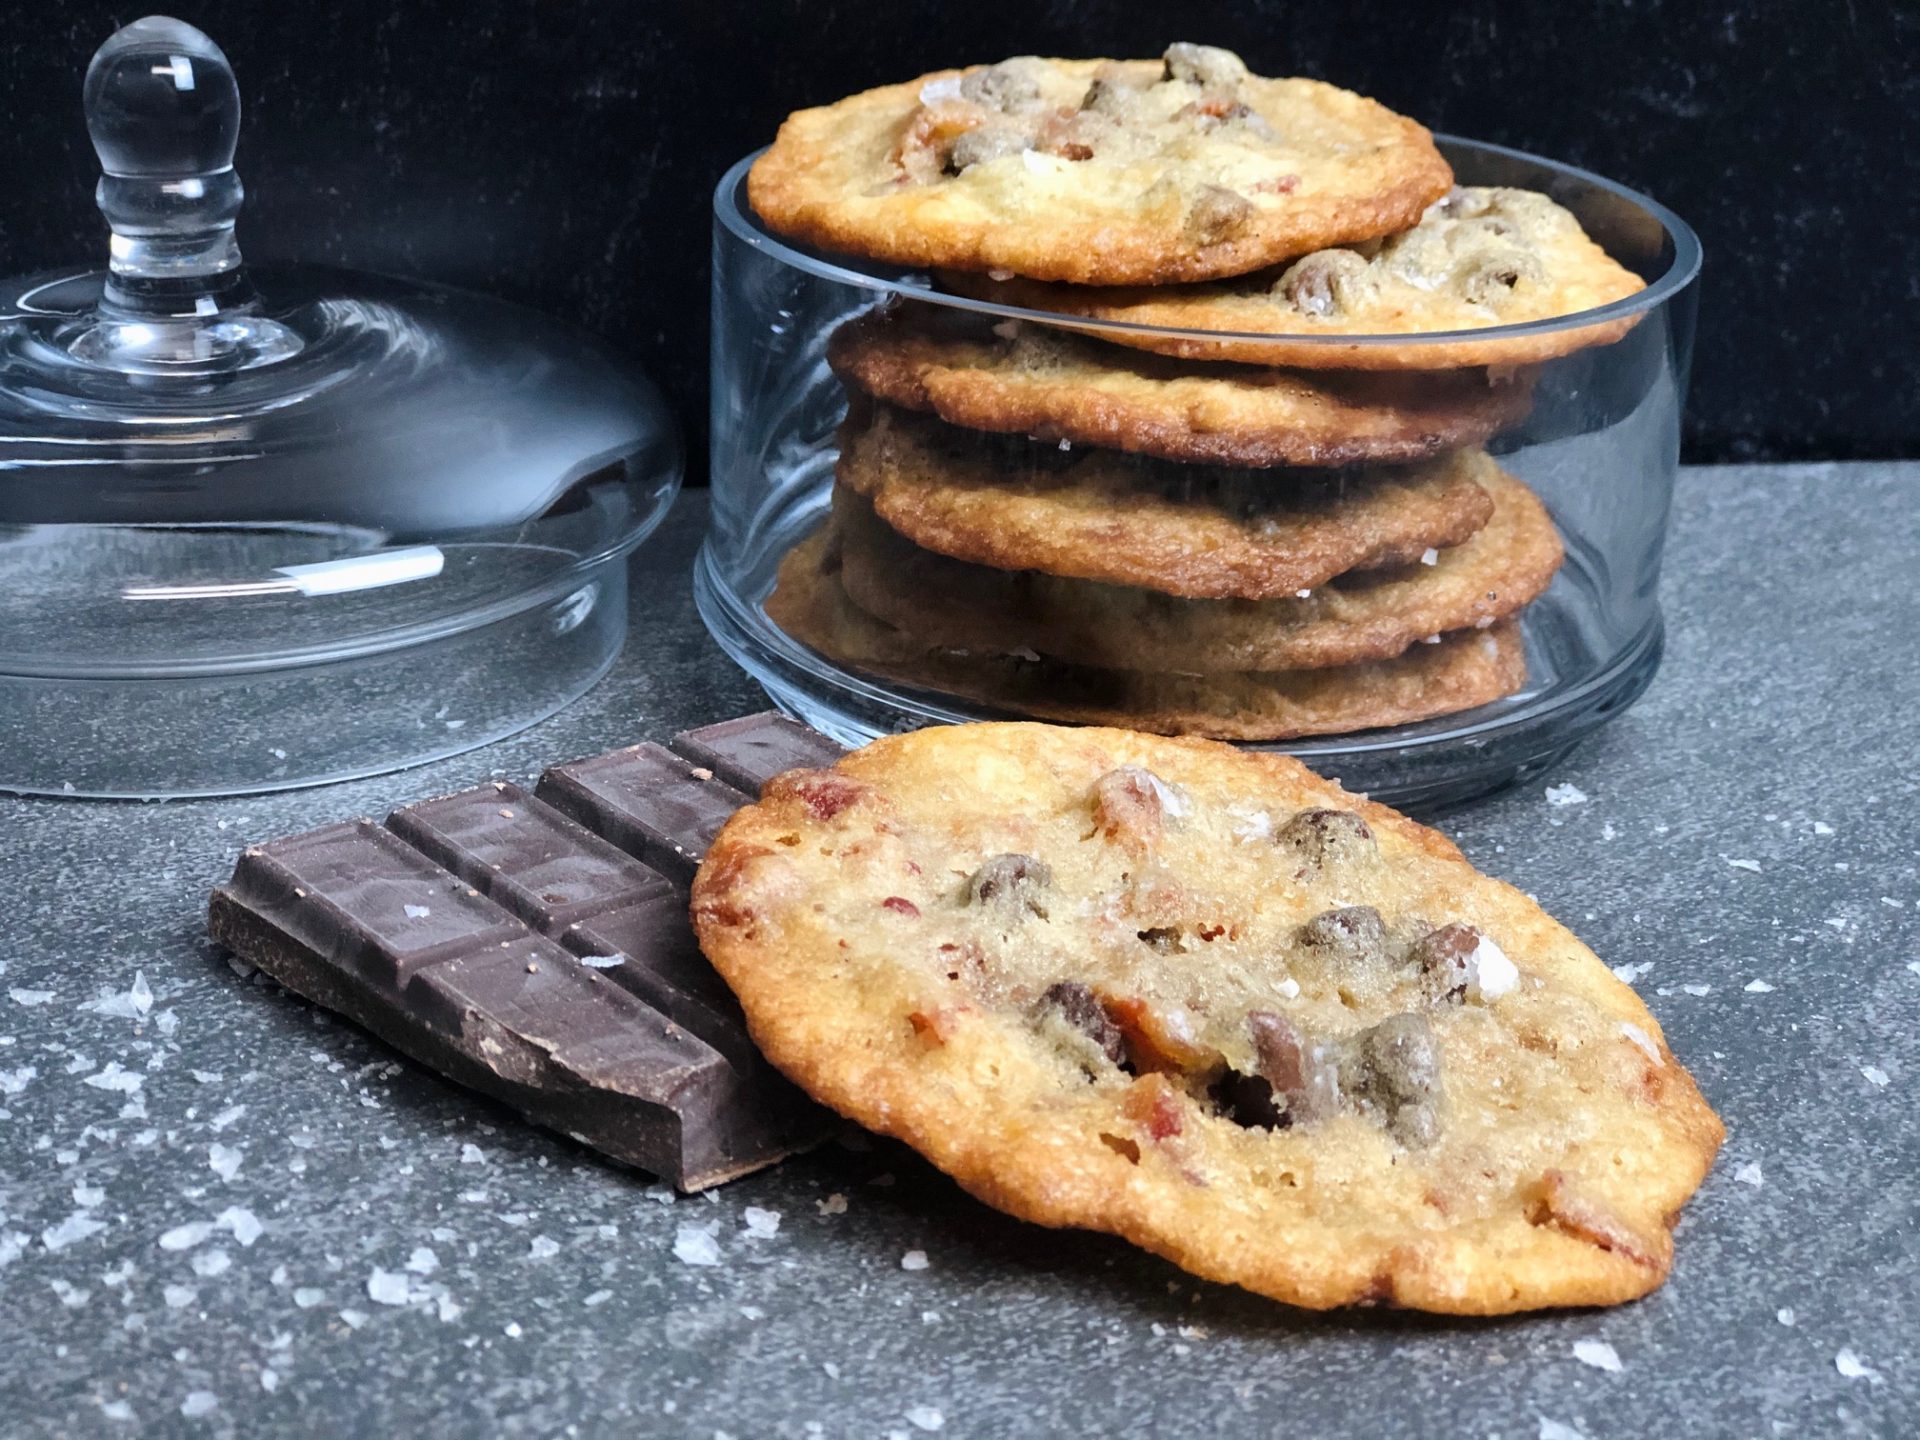 maple-bacon-chocolate-chip-cookies-recipe-heather-lucilles-kitchen-food-blog